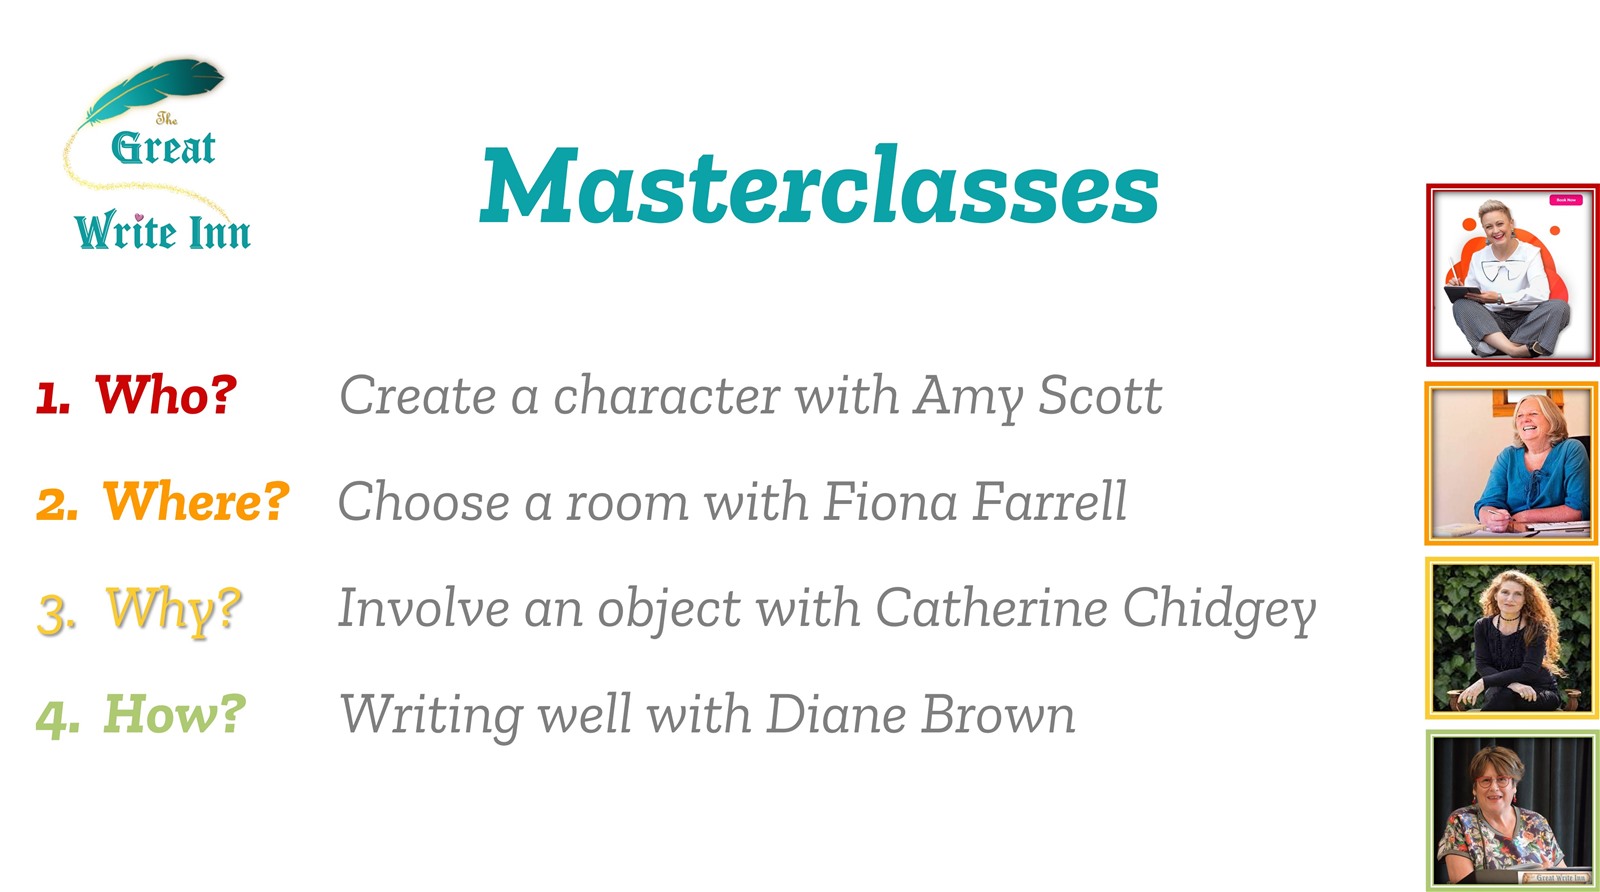 Masterclasses for the Great Write Inn taught by Amy Scott, Catherine chridgey